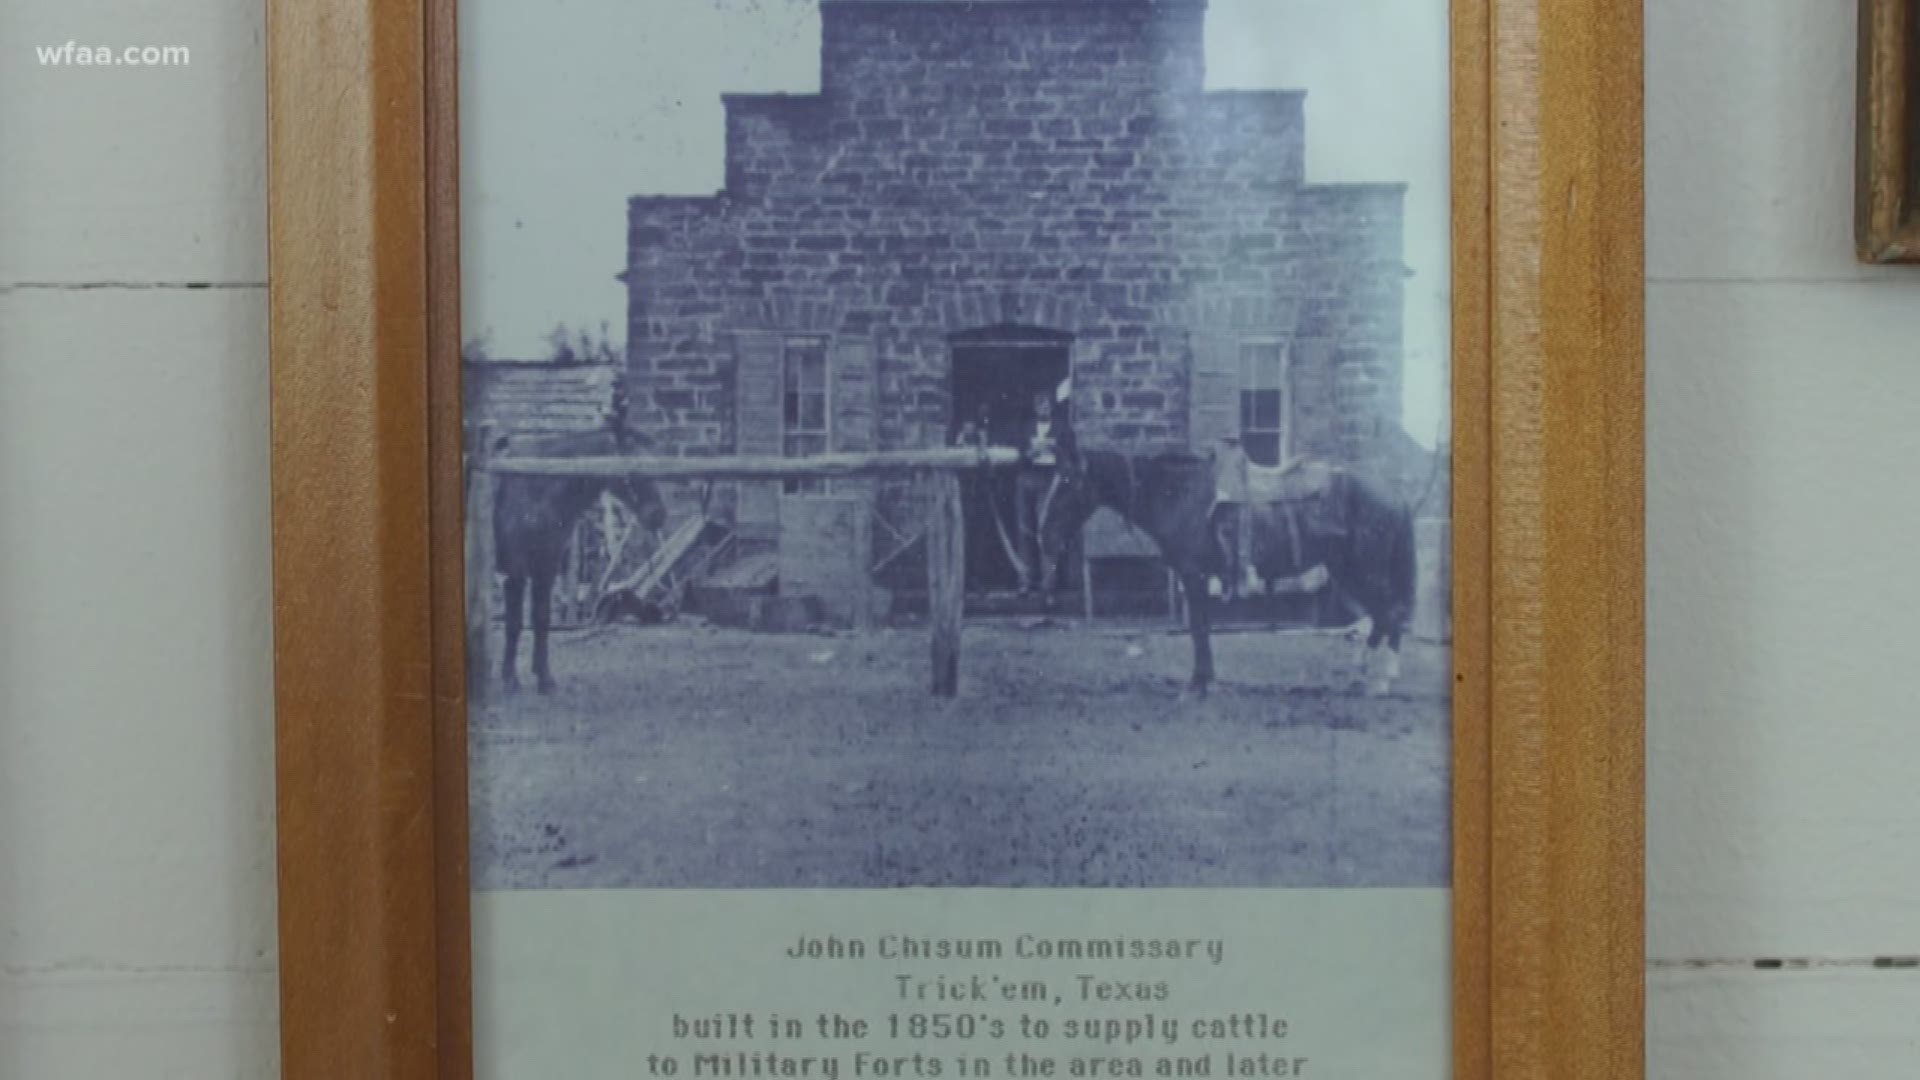 What's in a name? The trickster behind Trickham, Texas